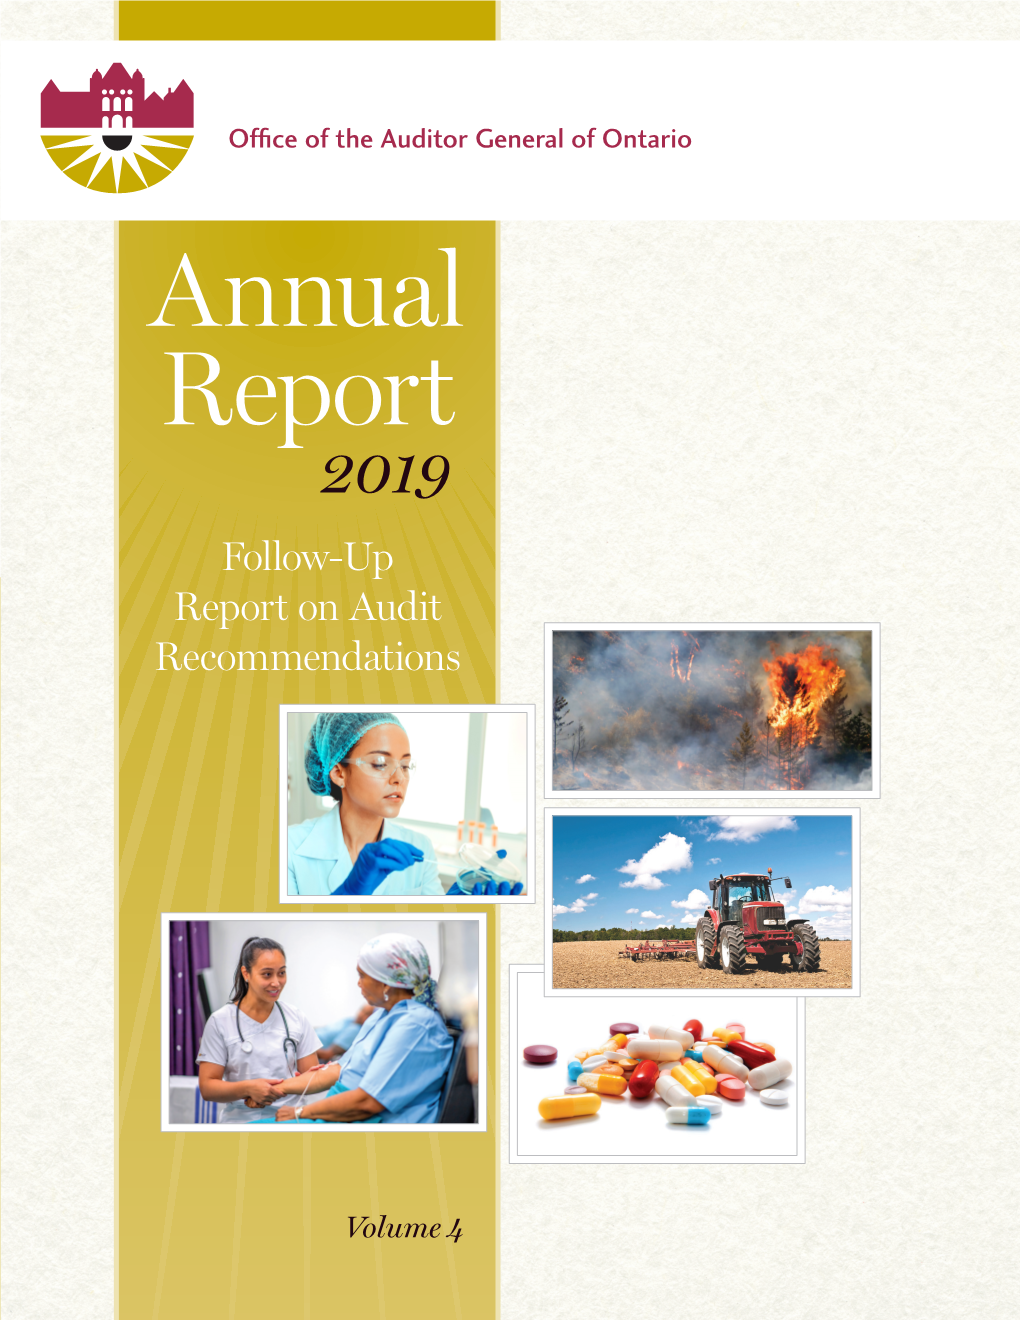 Annual Report 2019 of the Office of the Auditor General of Ontario Follow-Up Report on Audit Recommendations